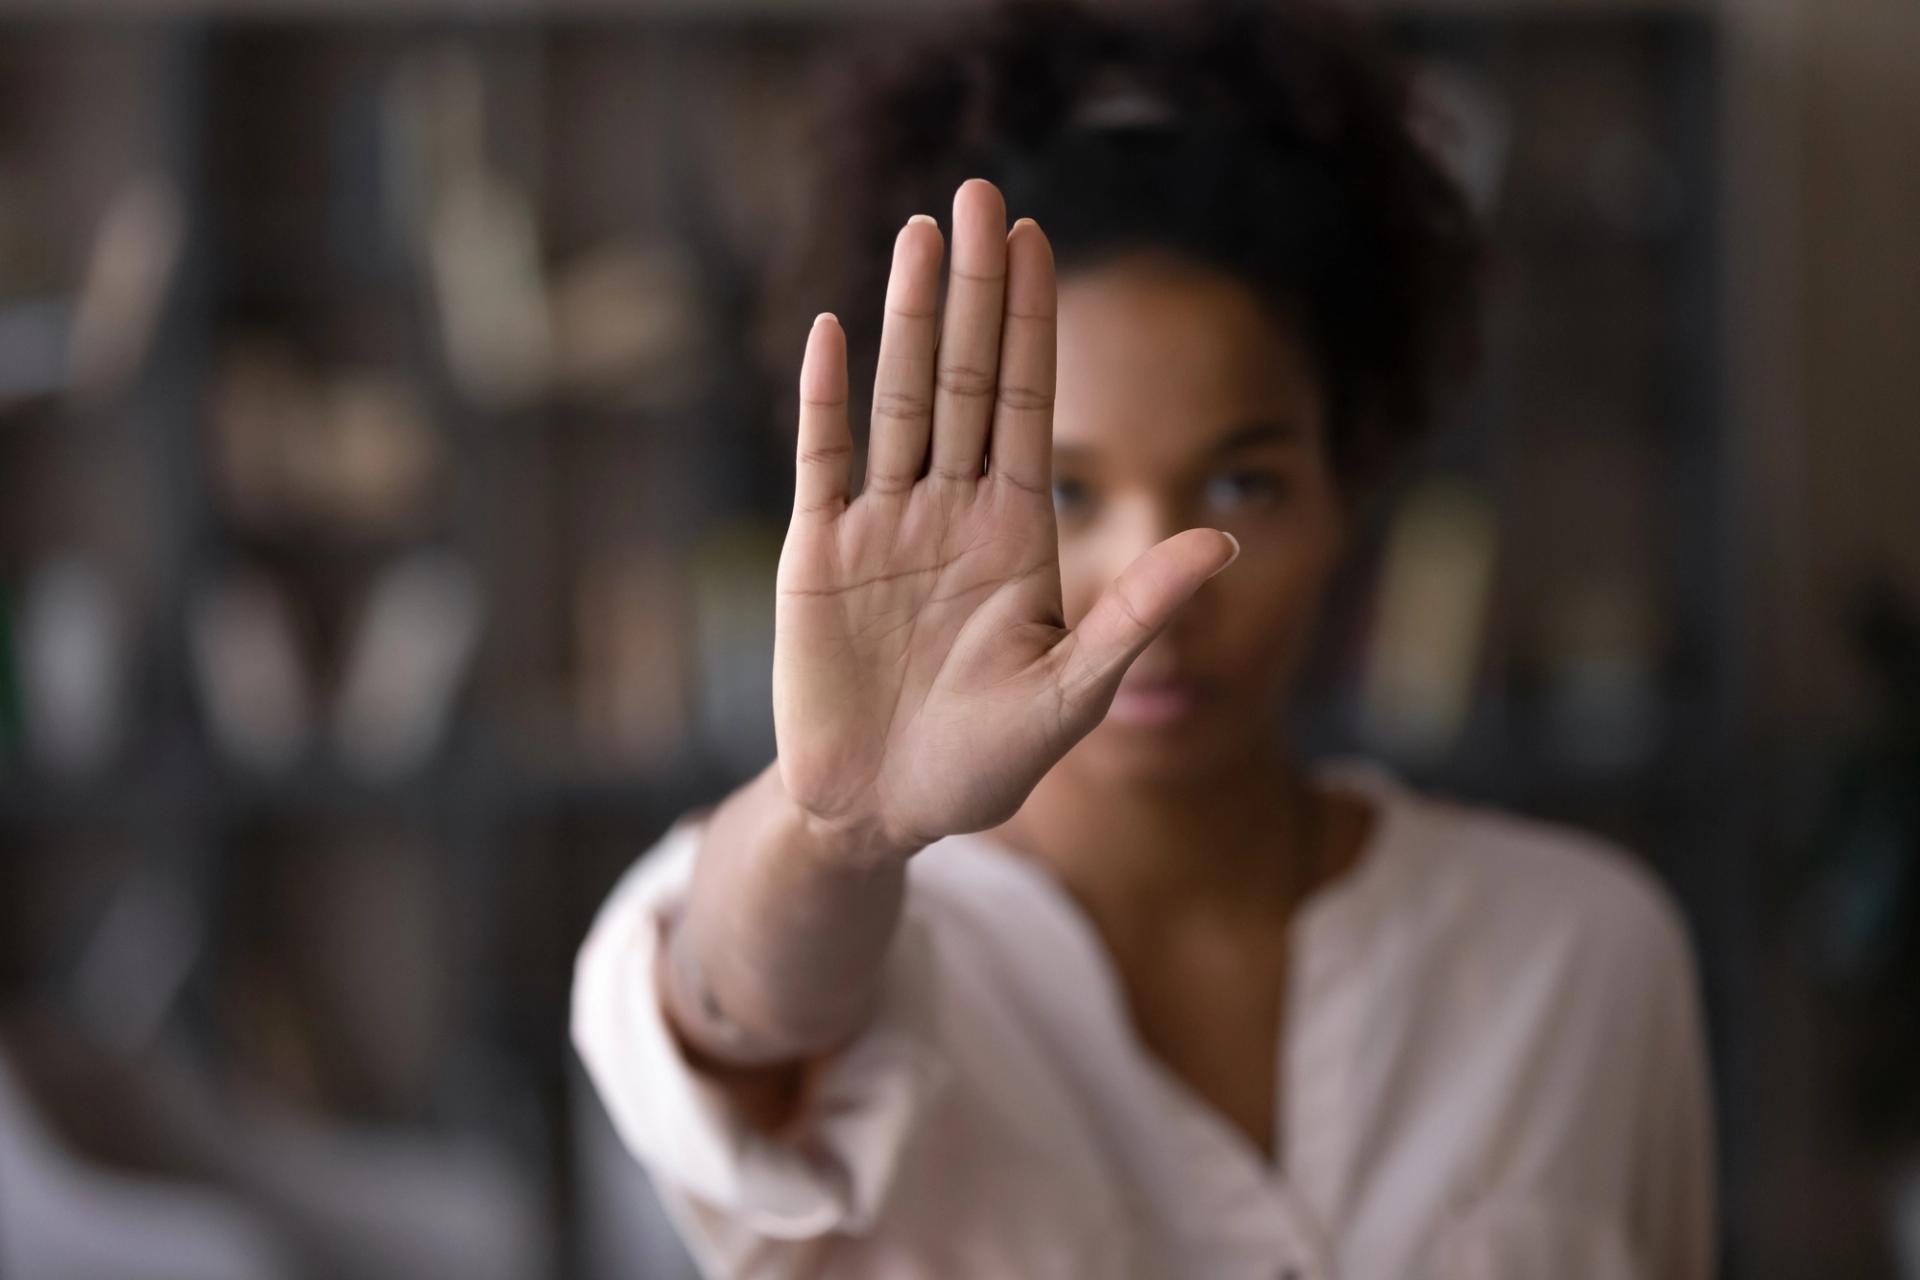 A woman holding up her hand to signal "stop"